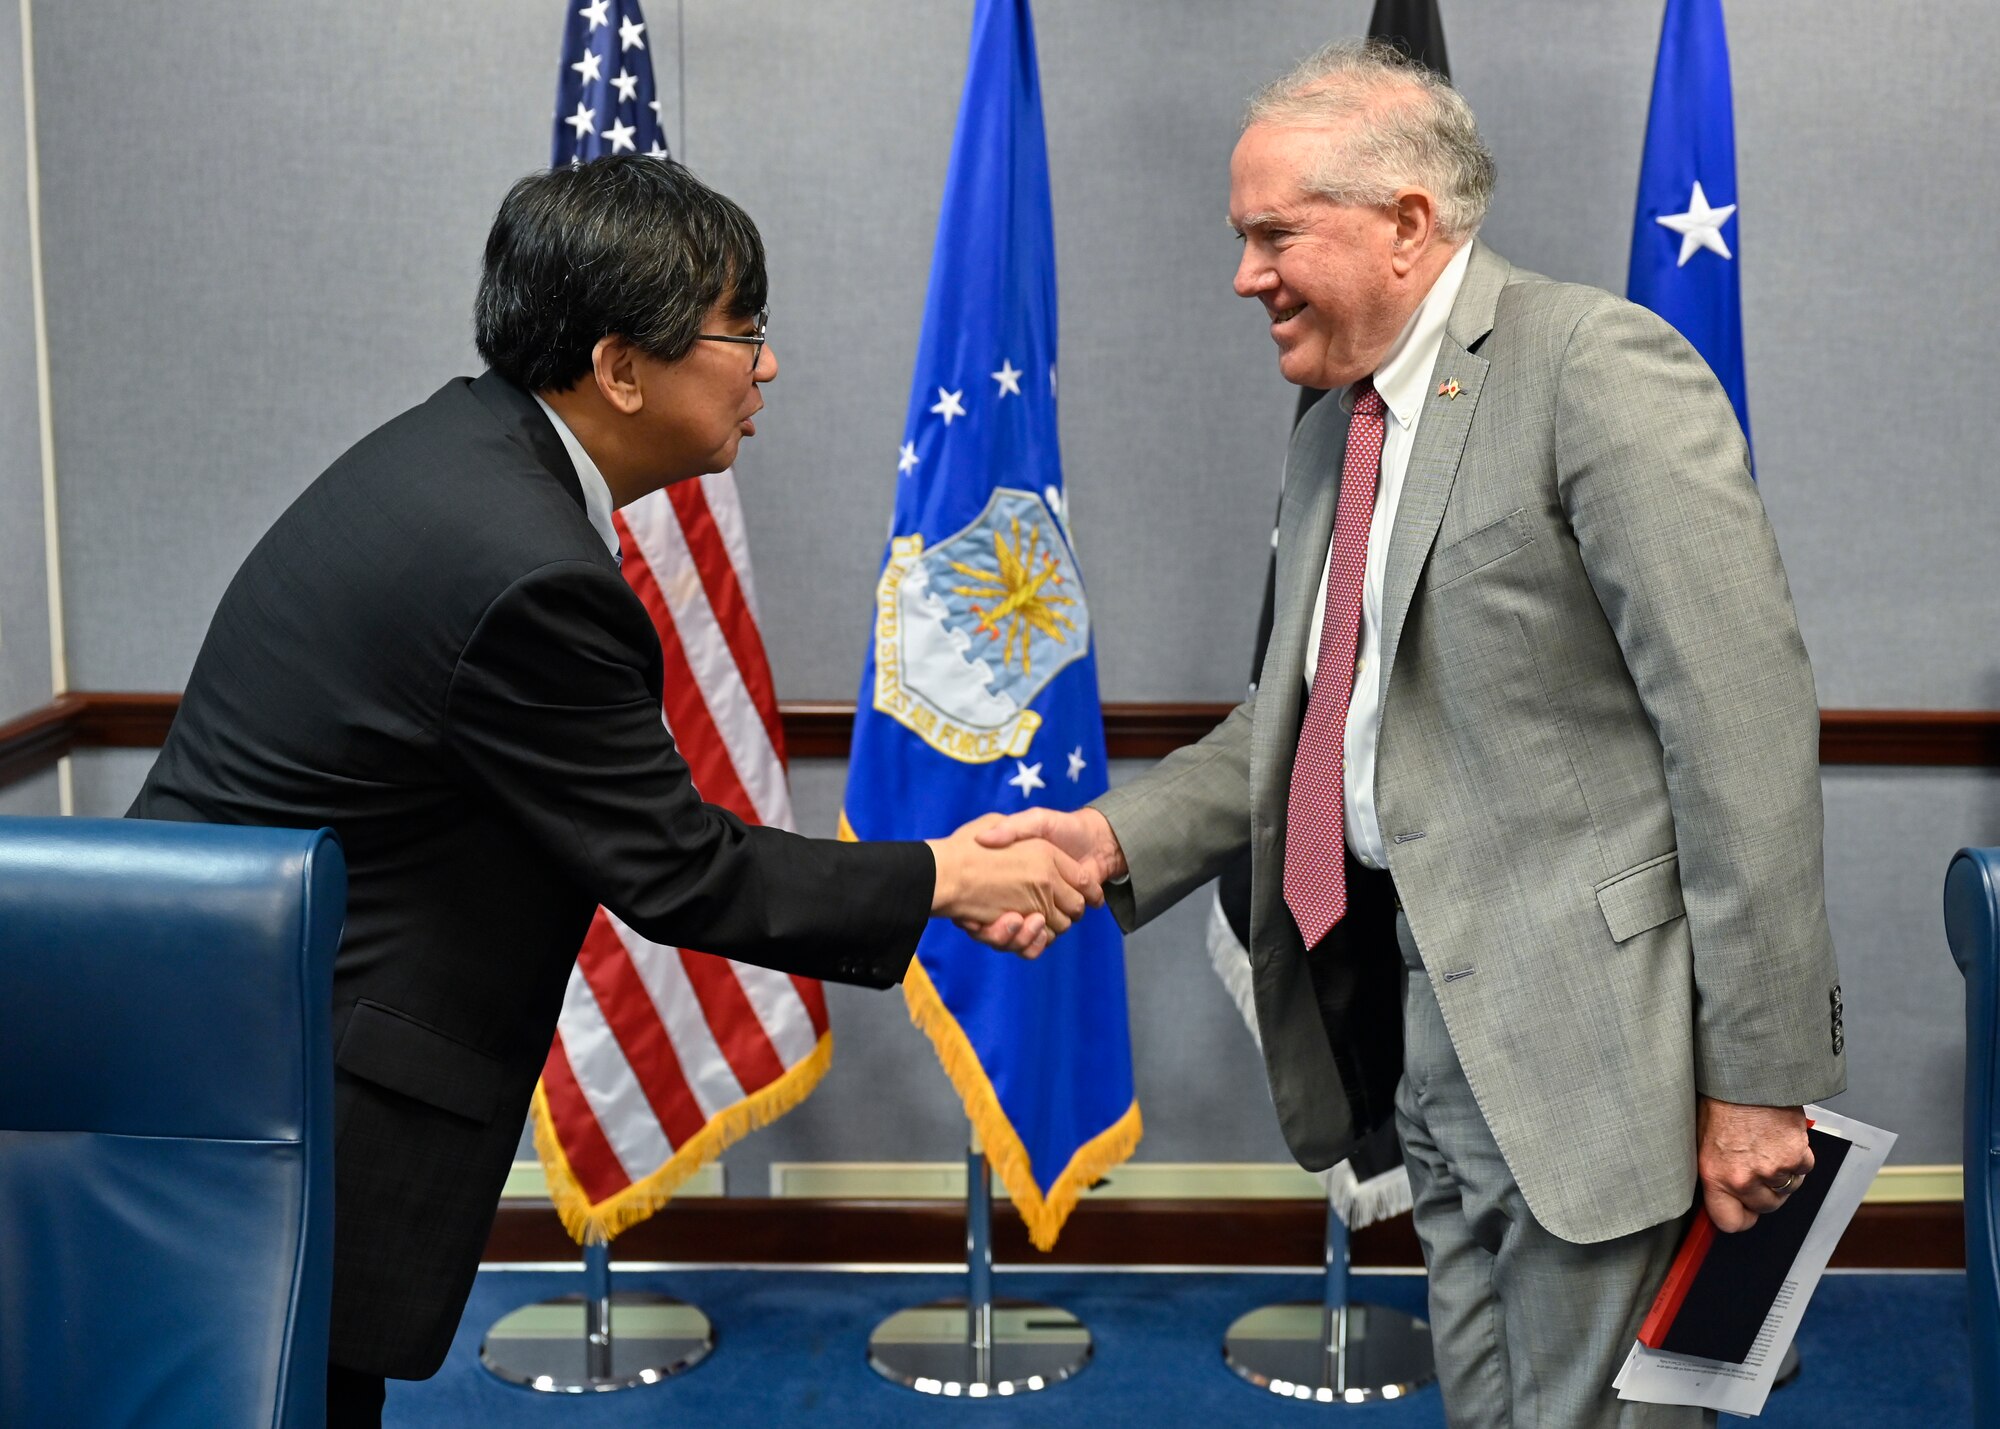 Secretary of the Air Force Frank Kendall, right, greets Hideki Tsuchimoto, commissioner of the Acquisition, Technology and Logistics Agency, Japanese Ministry of Defense.